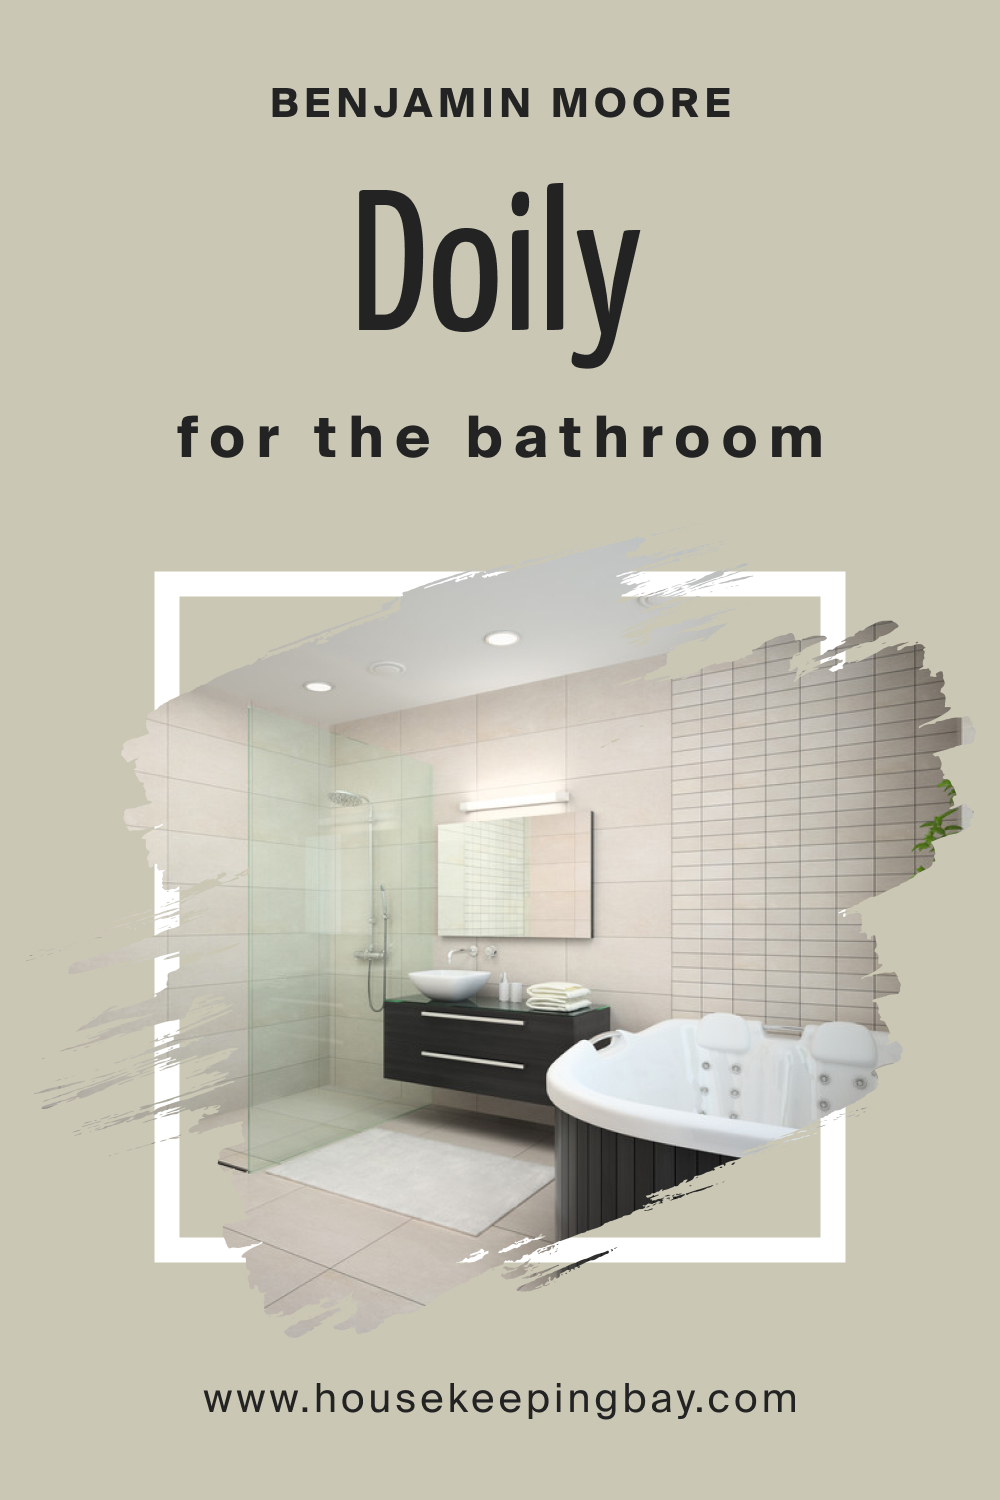 How to Use BM Doily CSP-130 in the Bathroom?